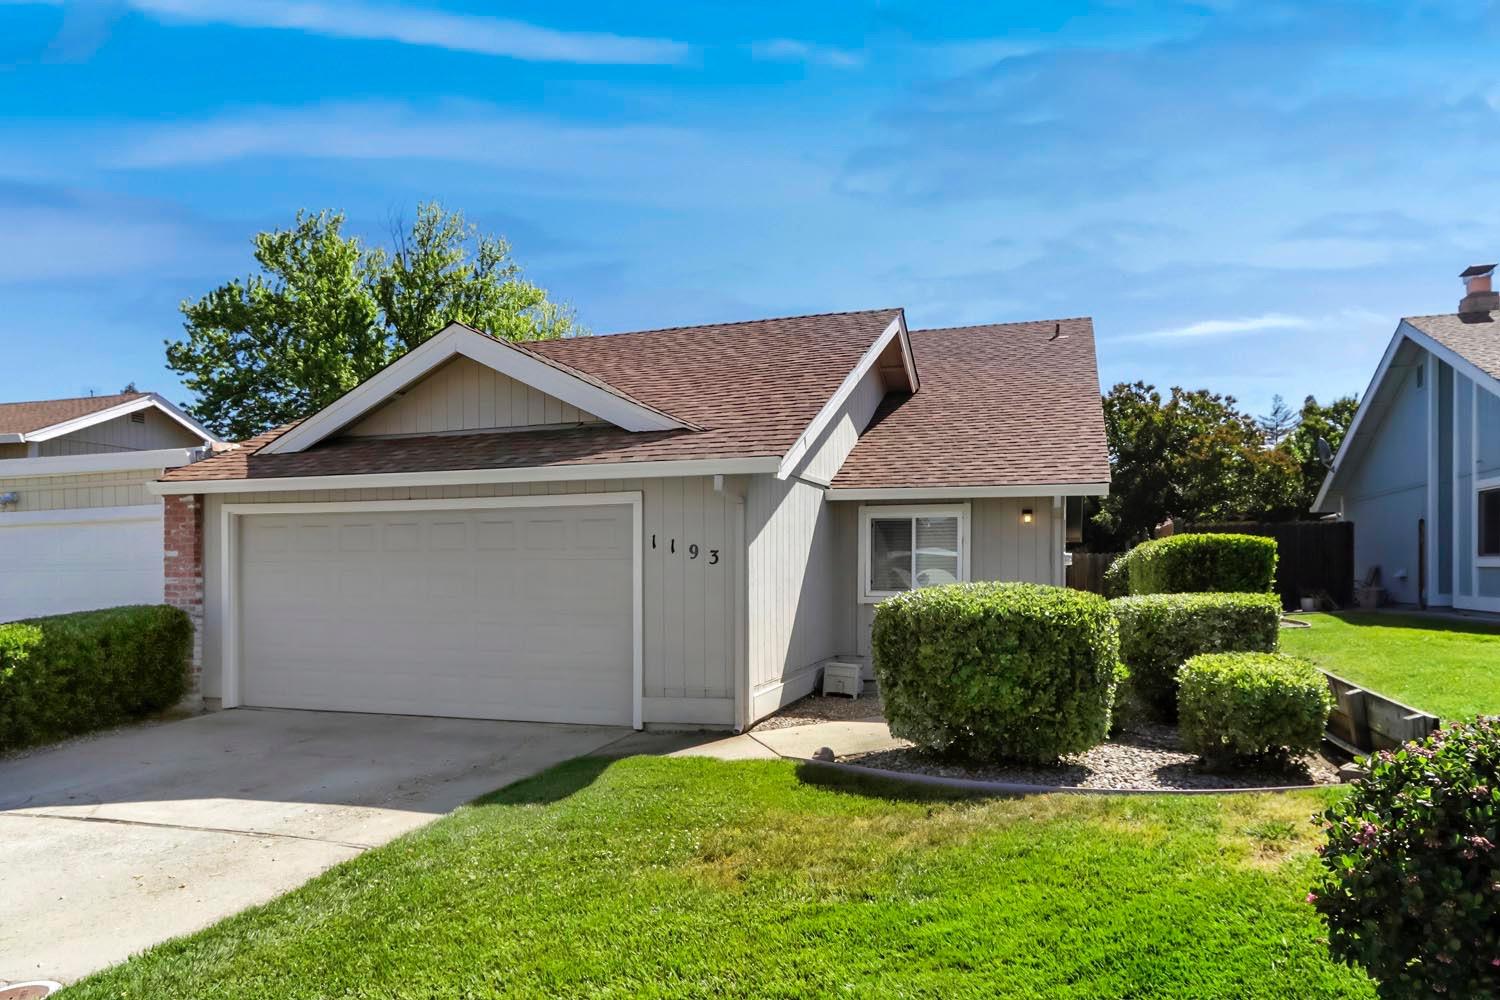 Photo of 1193 Green Hill Dr in Roseville, CA